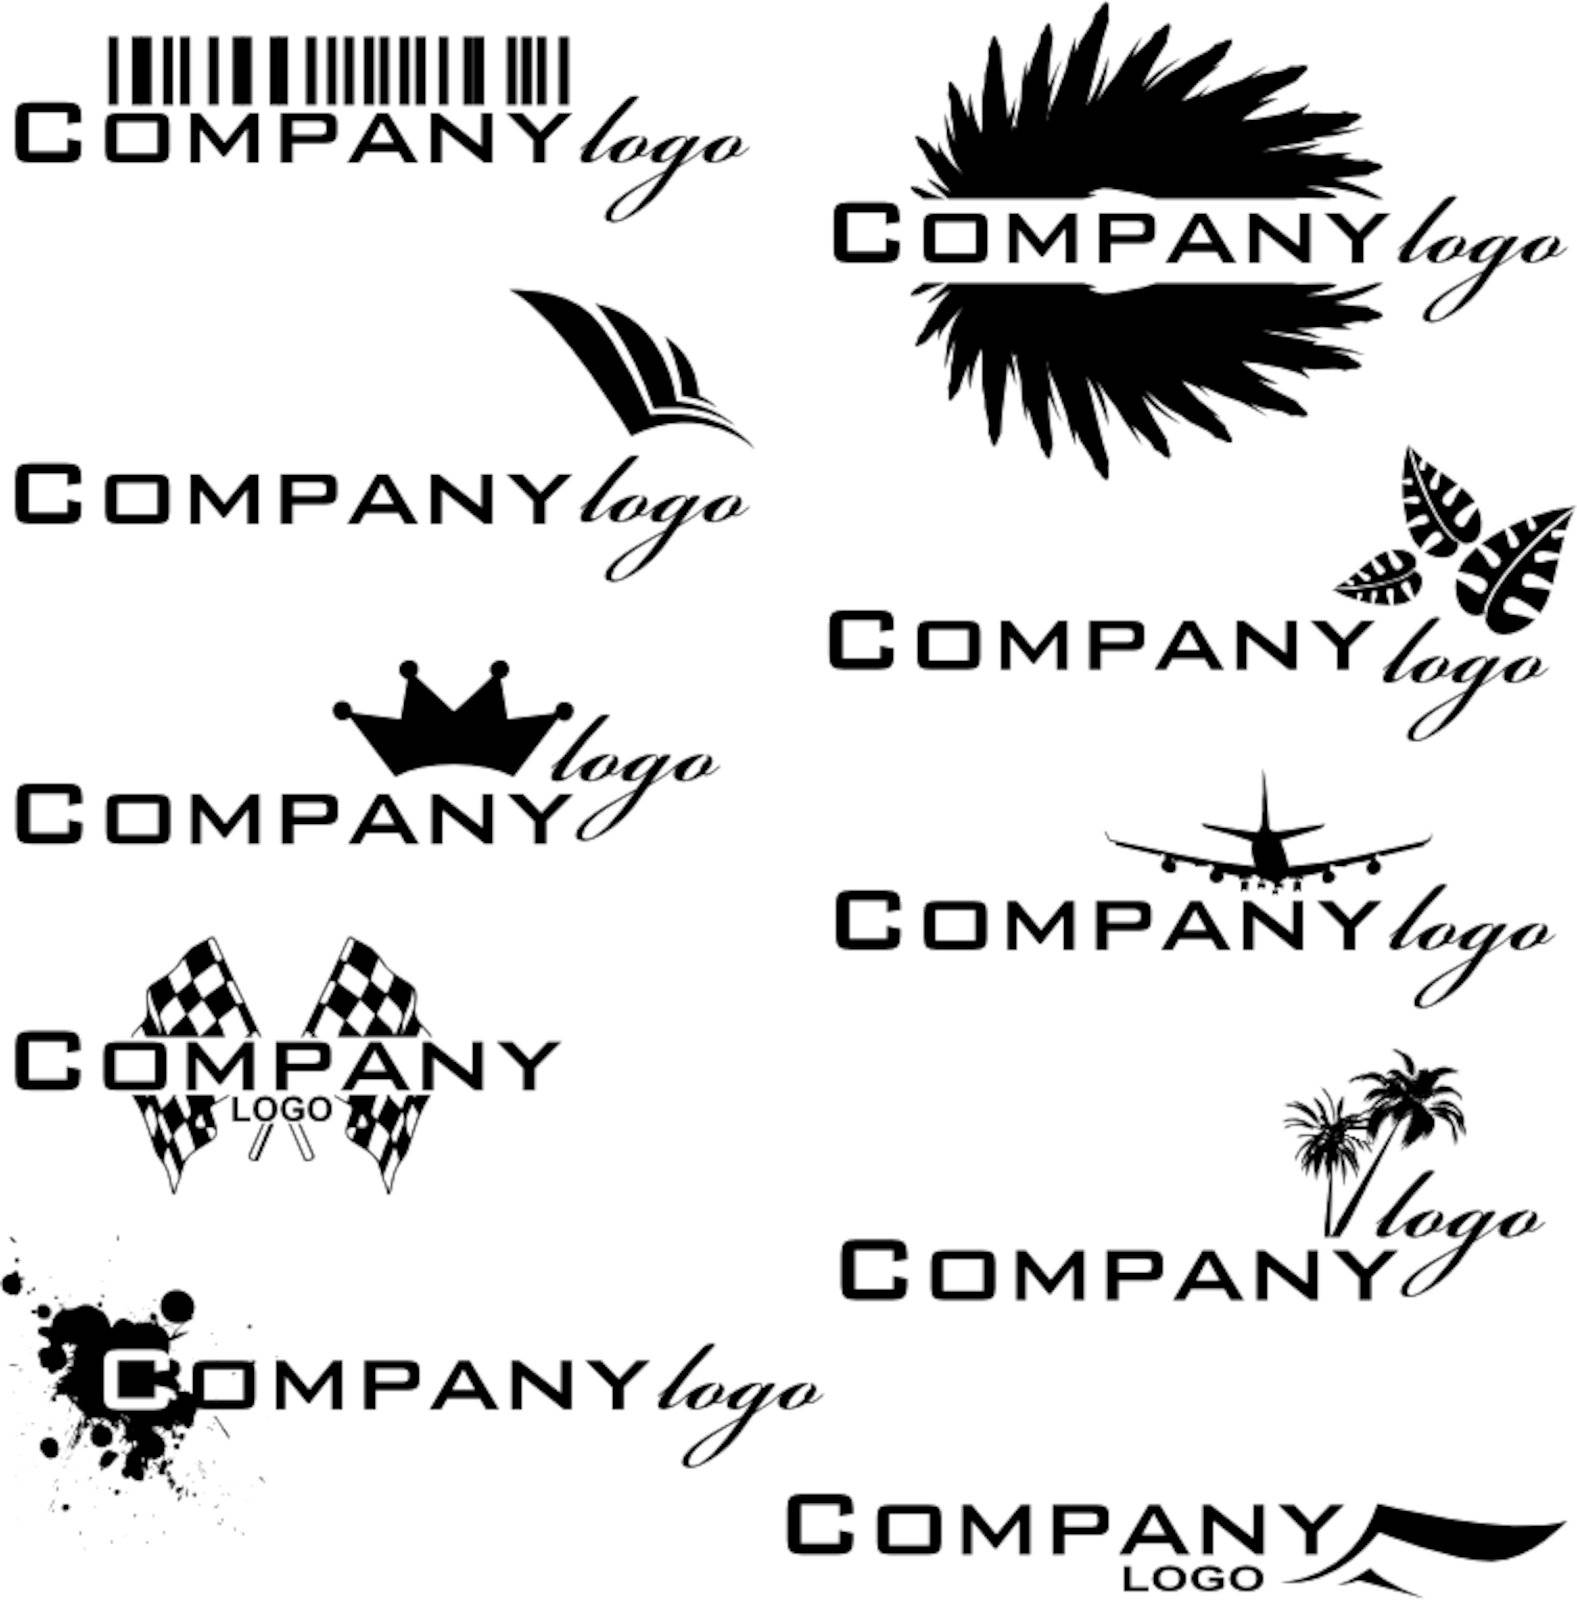 Collection of company logos in black and white that are easy to edit